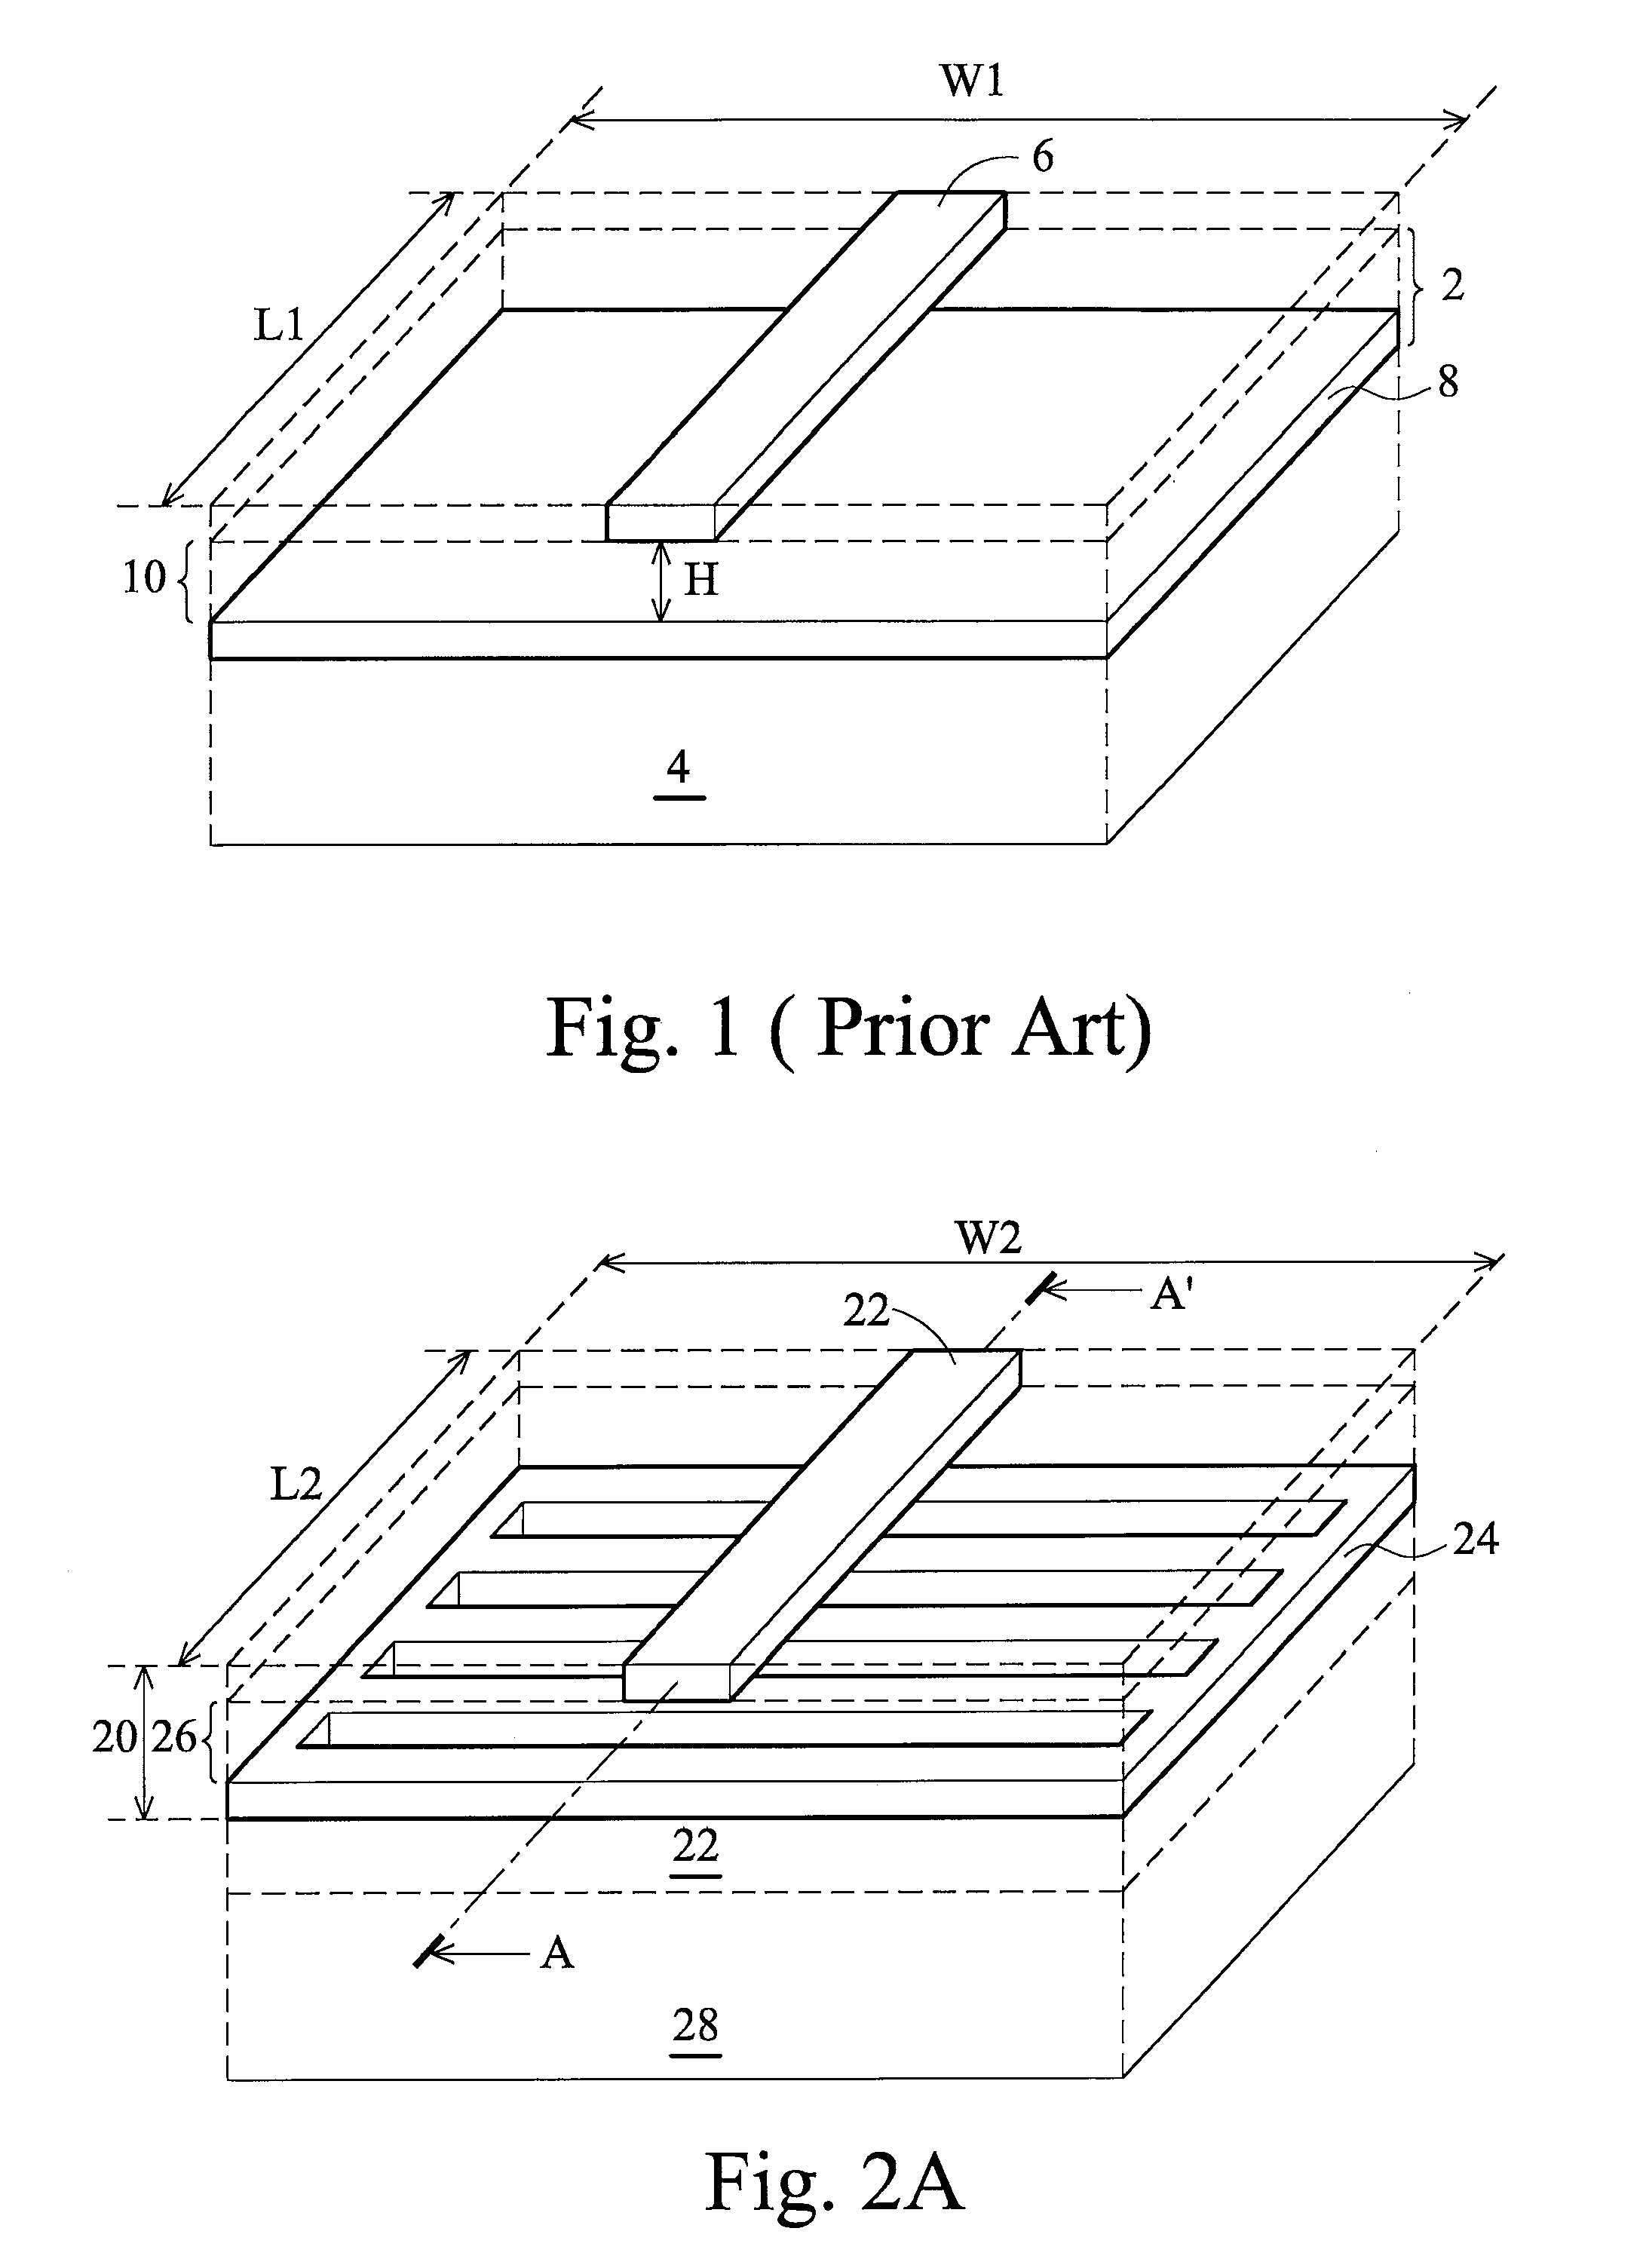 Microstrip Lines with Tunable Characteristic Impedance and Wavelength